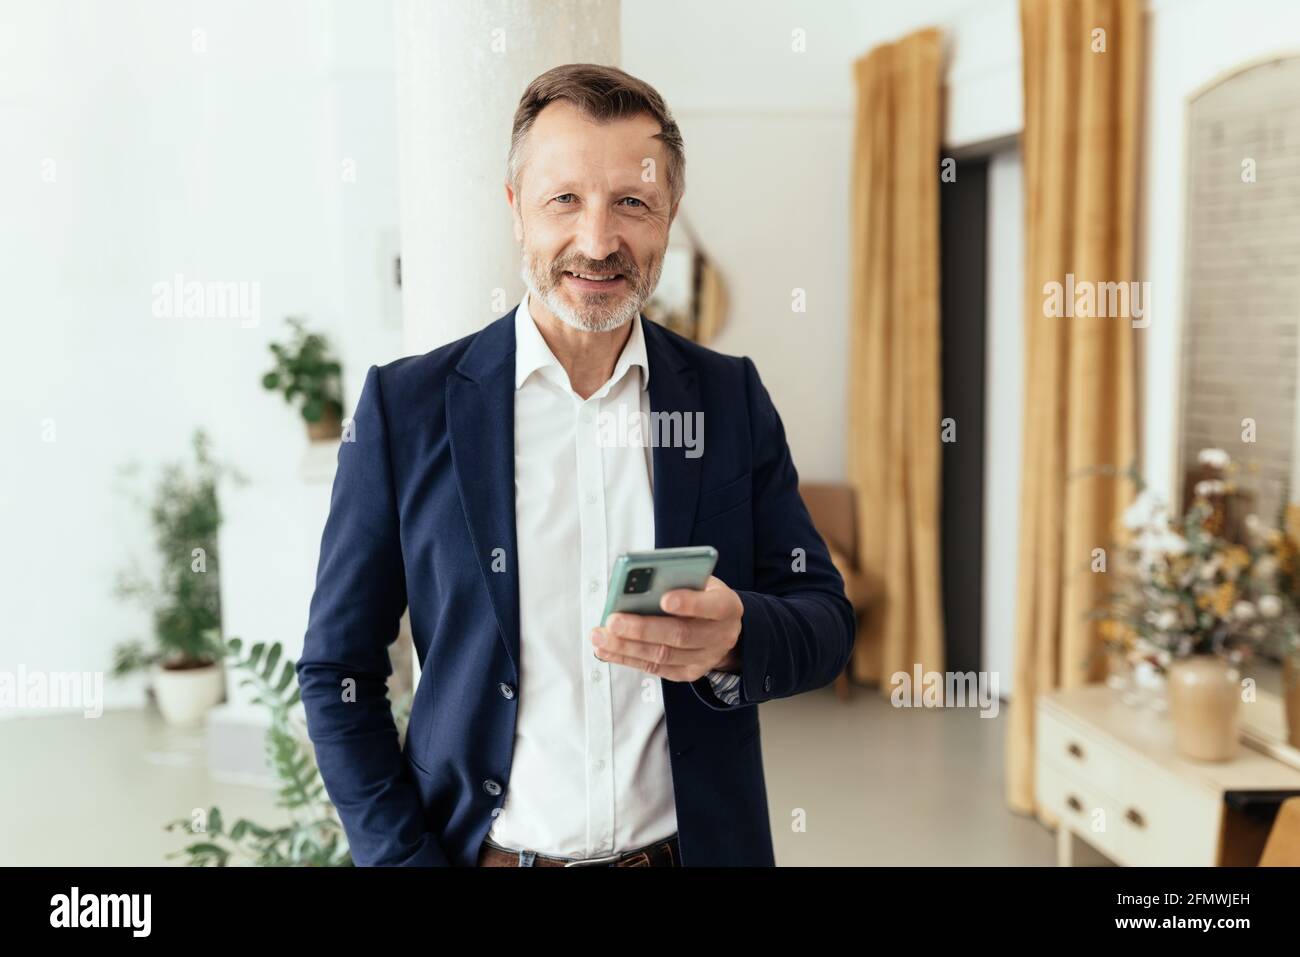 Businessman looking up with a smile at the camera while holding his mobile phone in his hand as though interrupted in what he was doing Stock Photo